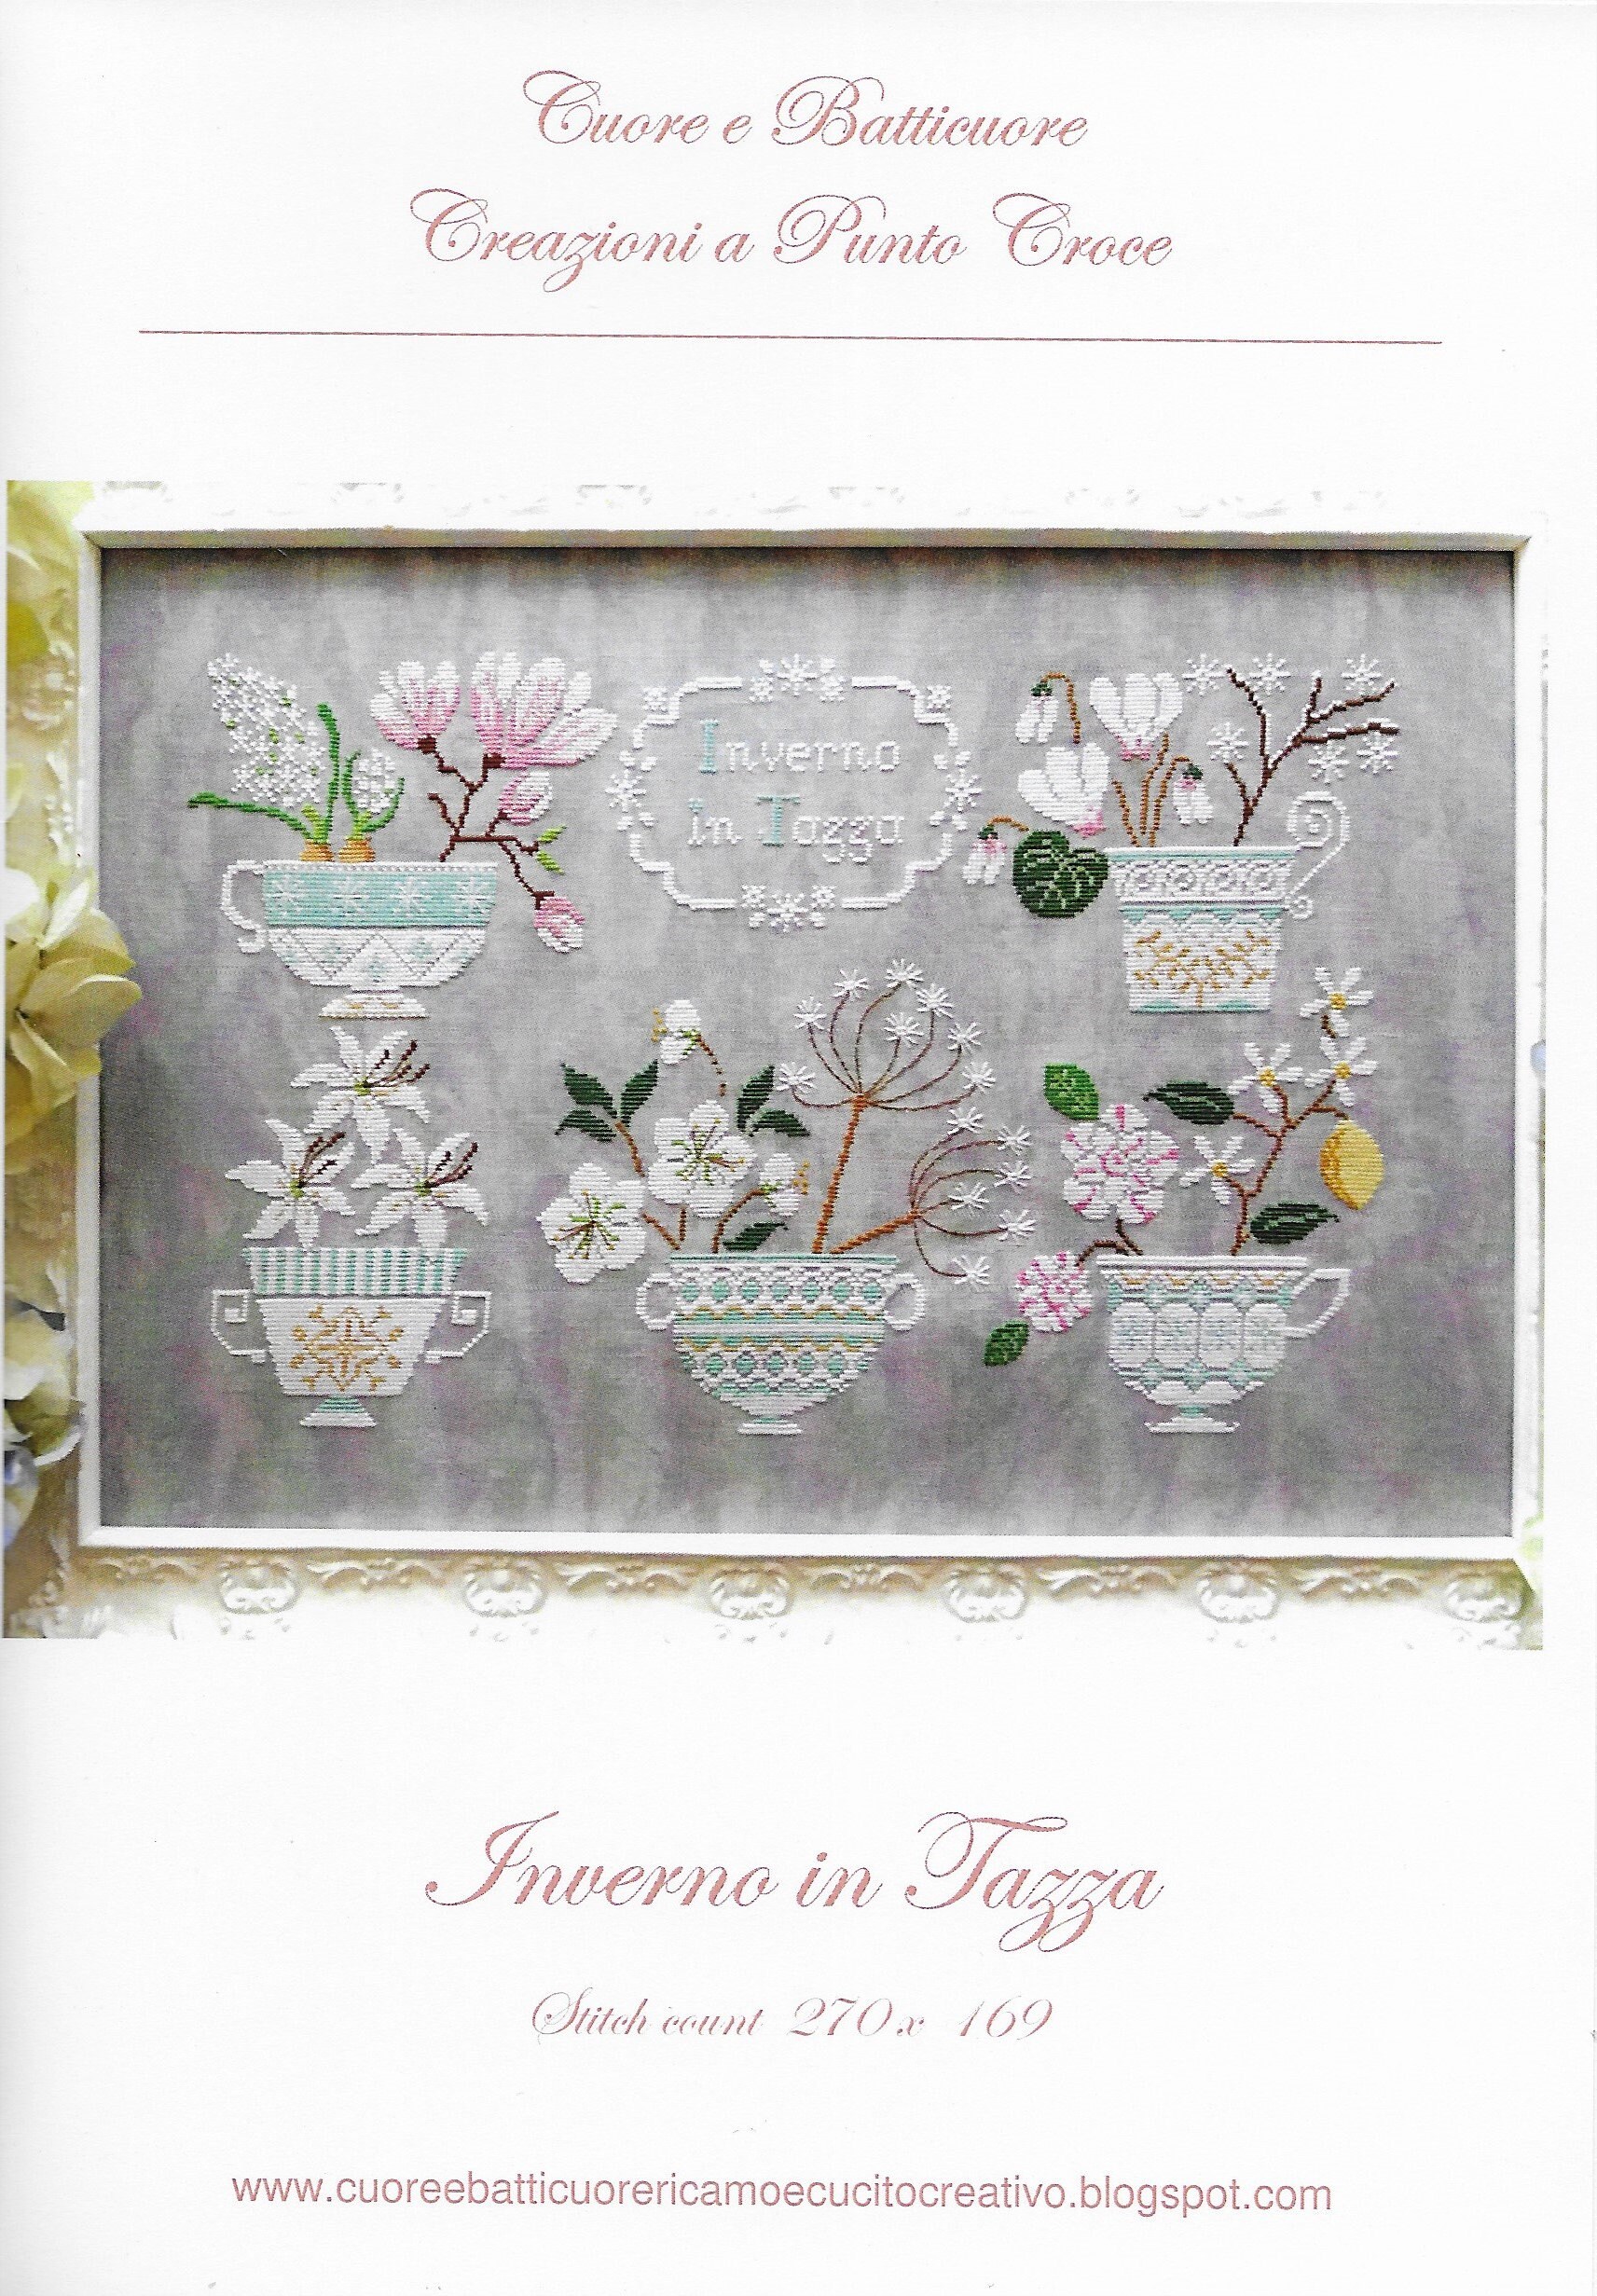 Counted Cross Stitch Pattern, Winter Teacups, Inverno in Tazza, Winter  Flowers, Teacups, Hyacinth, Crocus, Cuore E Batticuore, PATTERN ONLY 